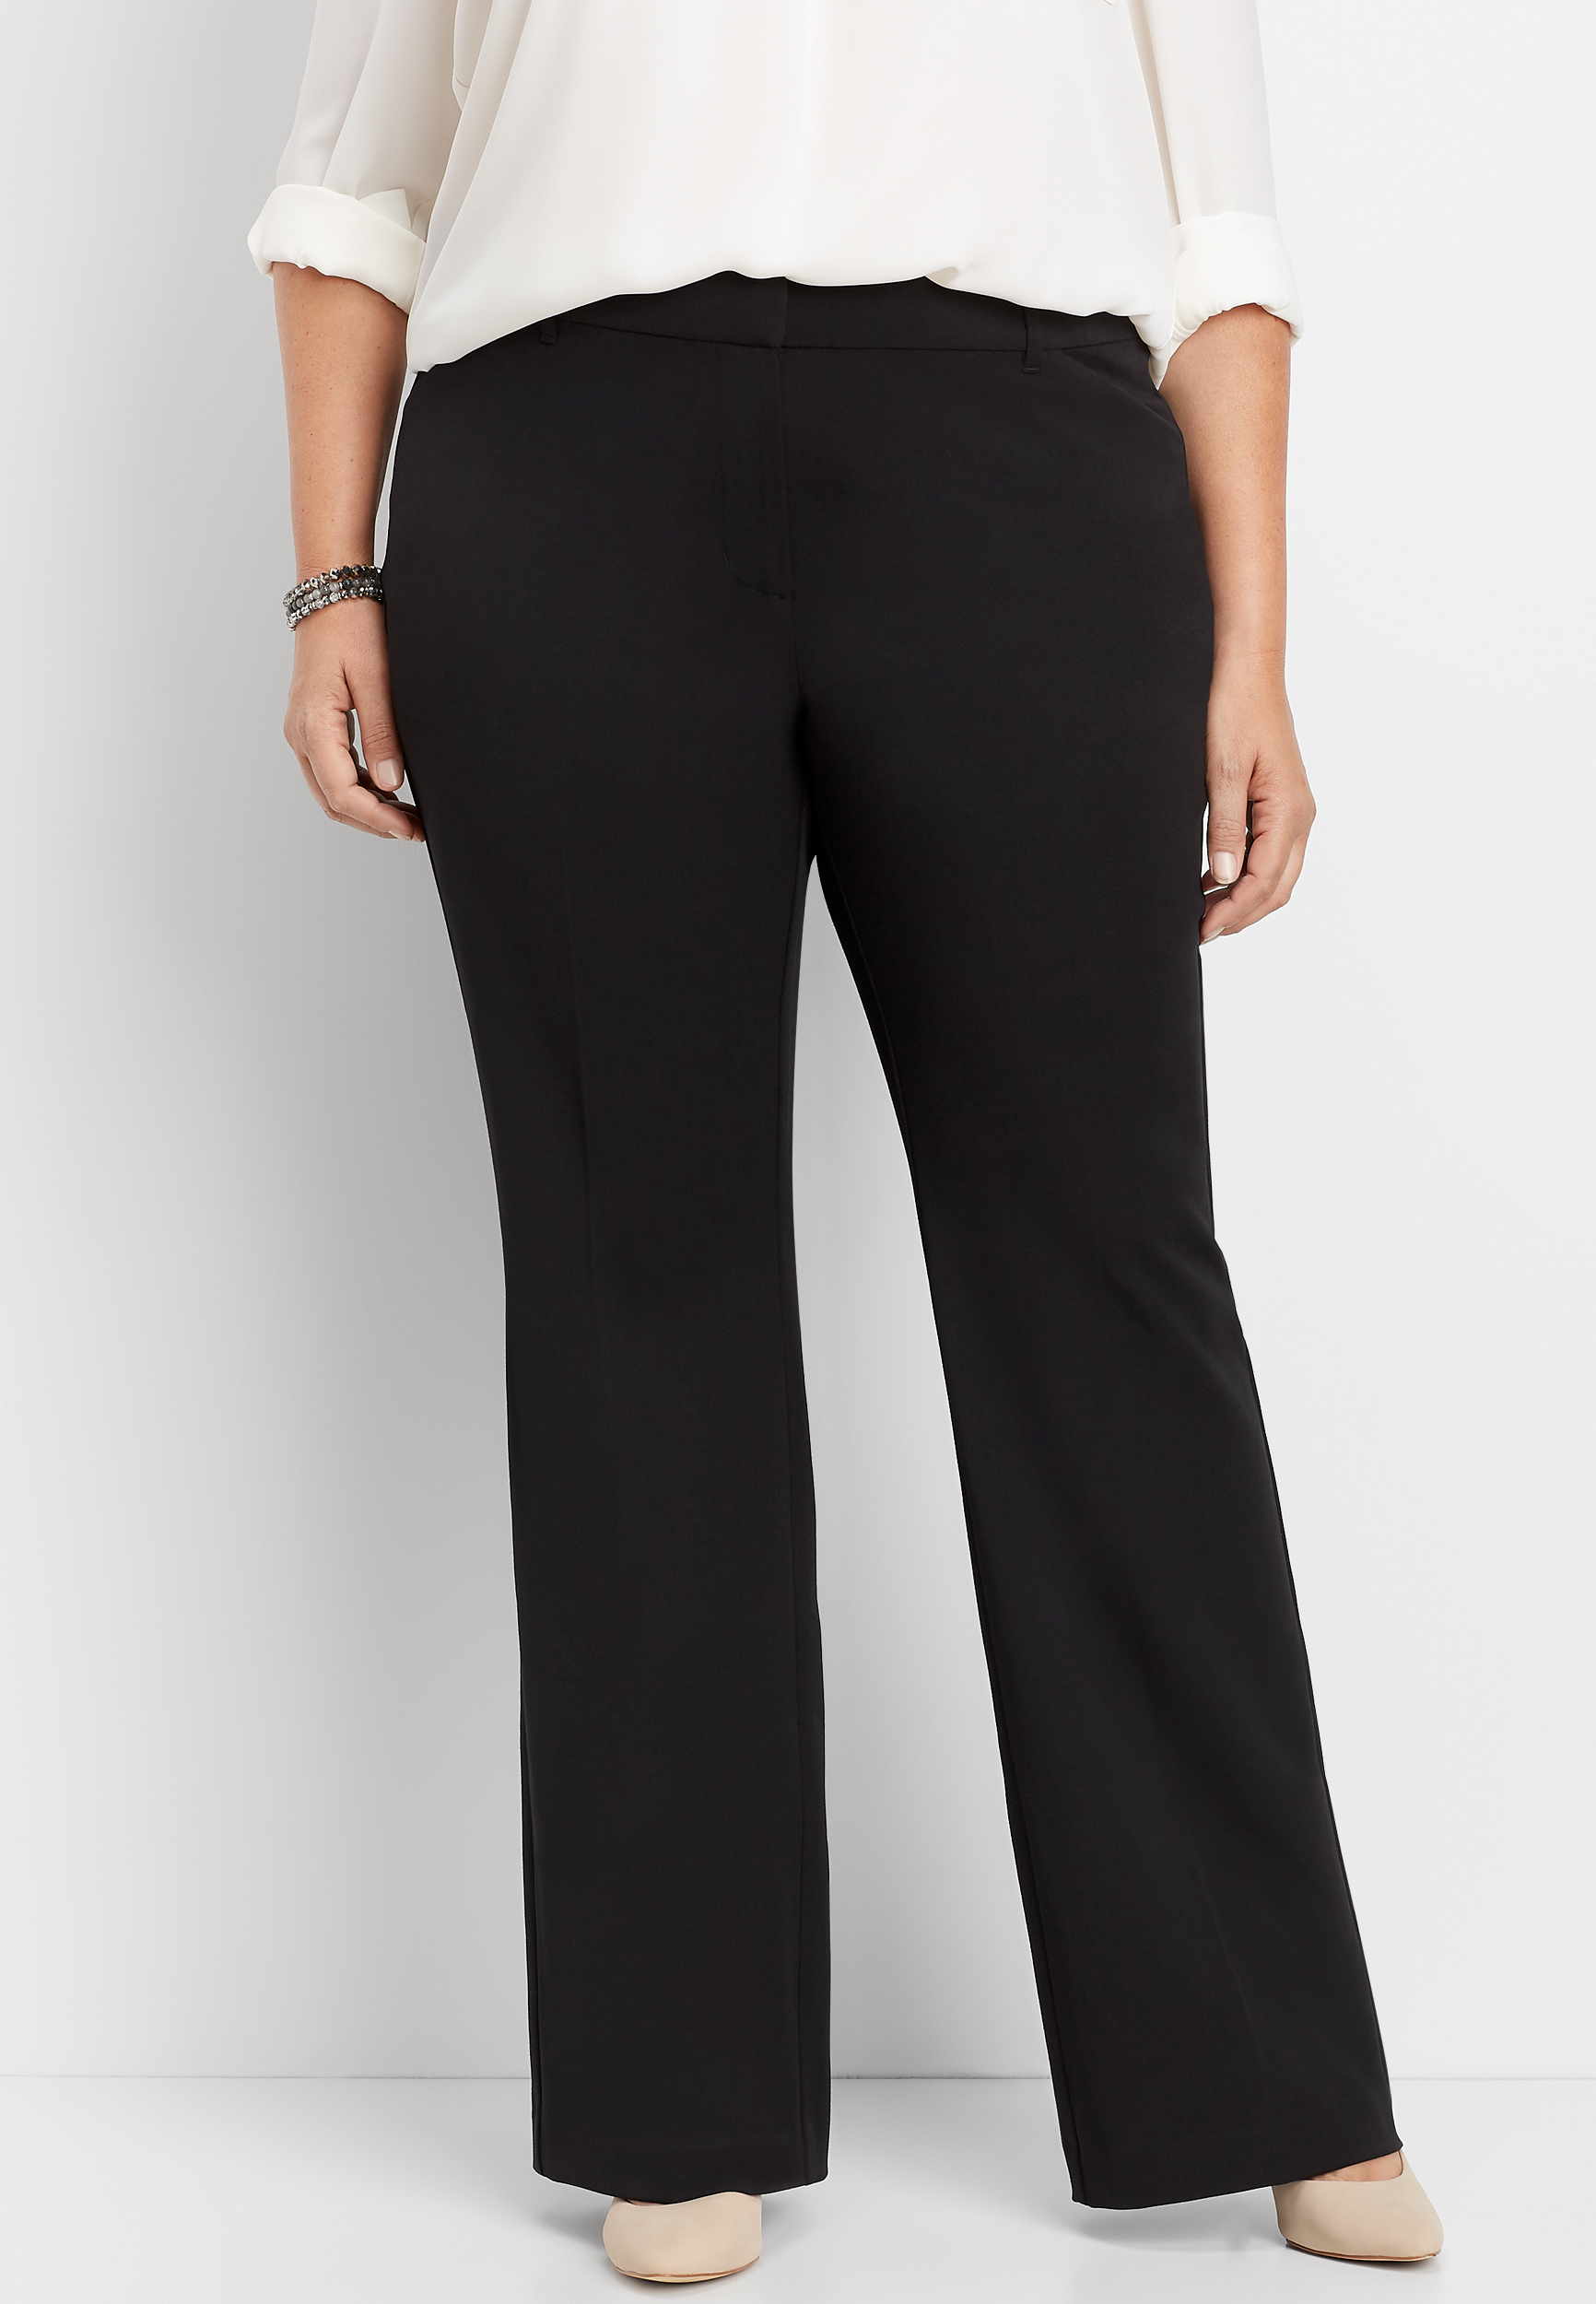 fit and flare pants plus size